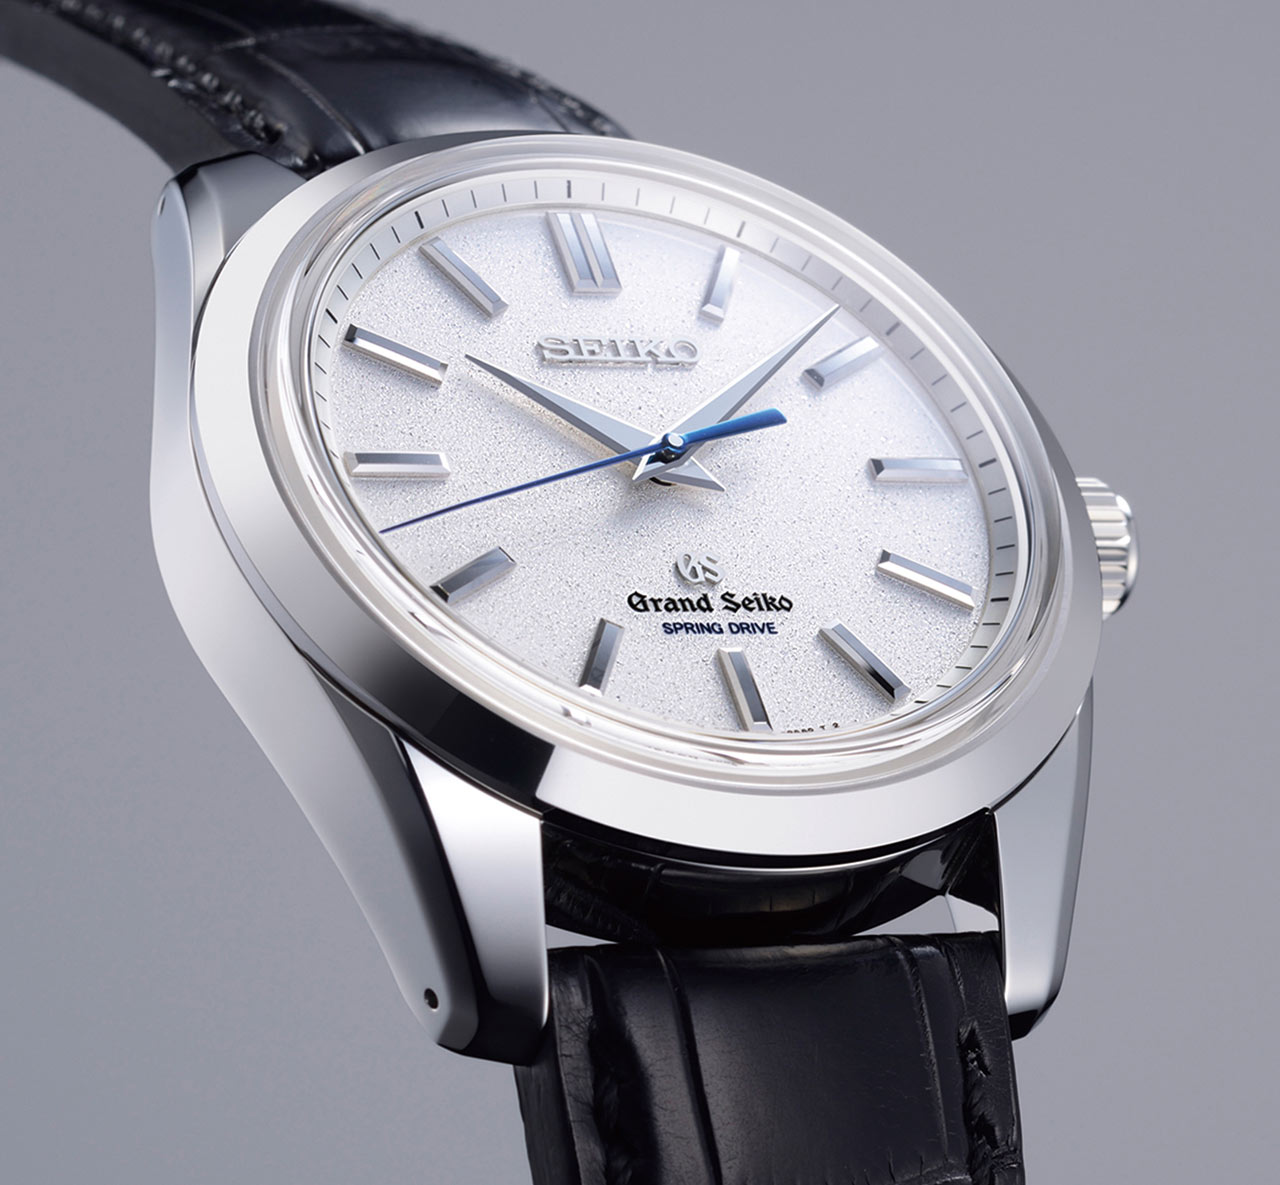 Grand Seiko - Spring Drive 8 Day Power Reserve in Platinum | Time and  Watches | The watch blog